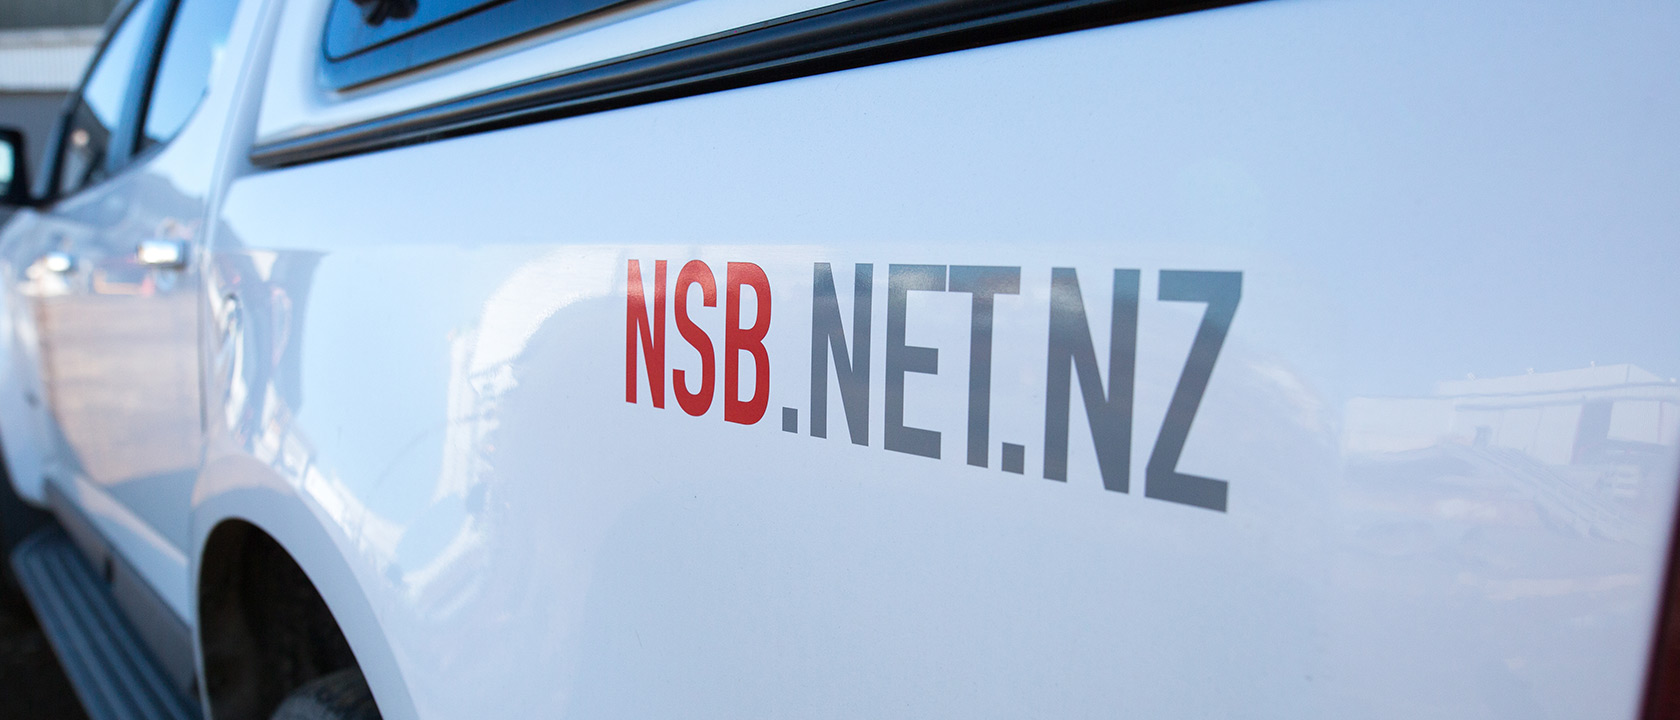 NSB Infrastructure | Band